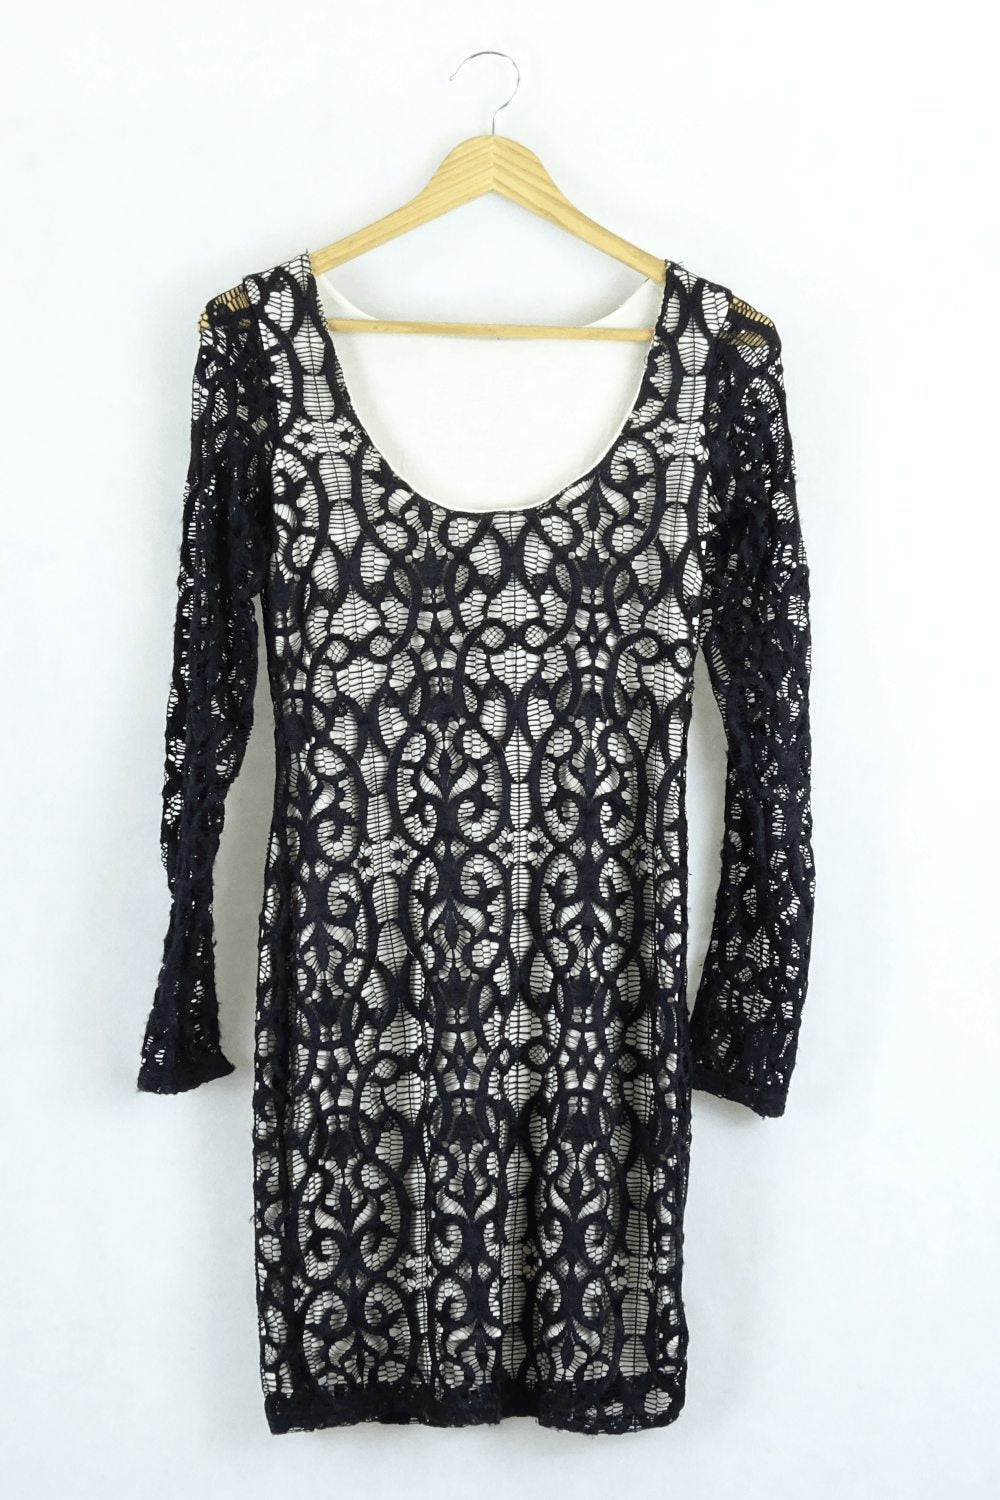 Asos Black And White Lace Dress 10